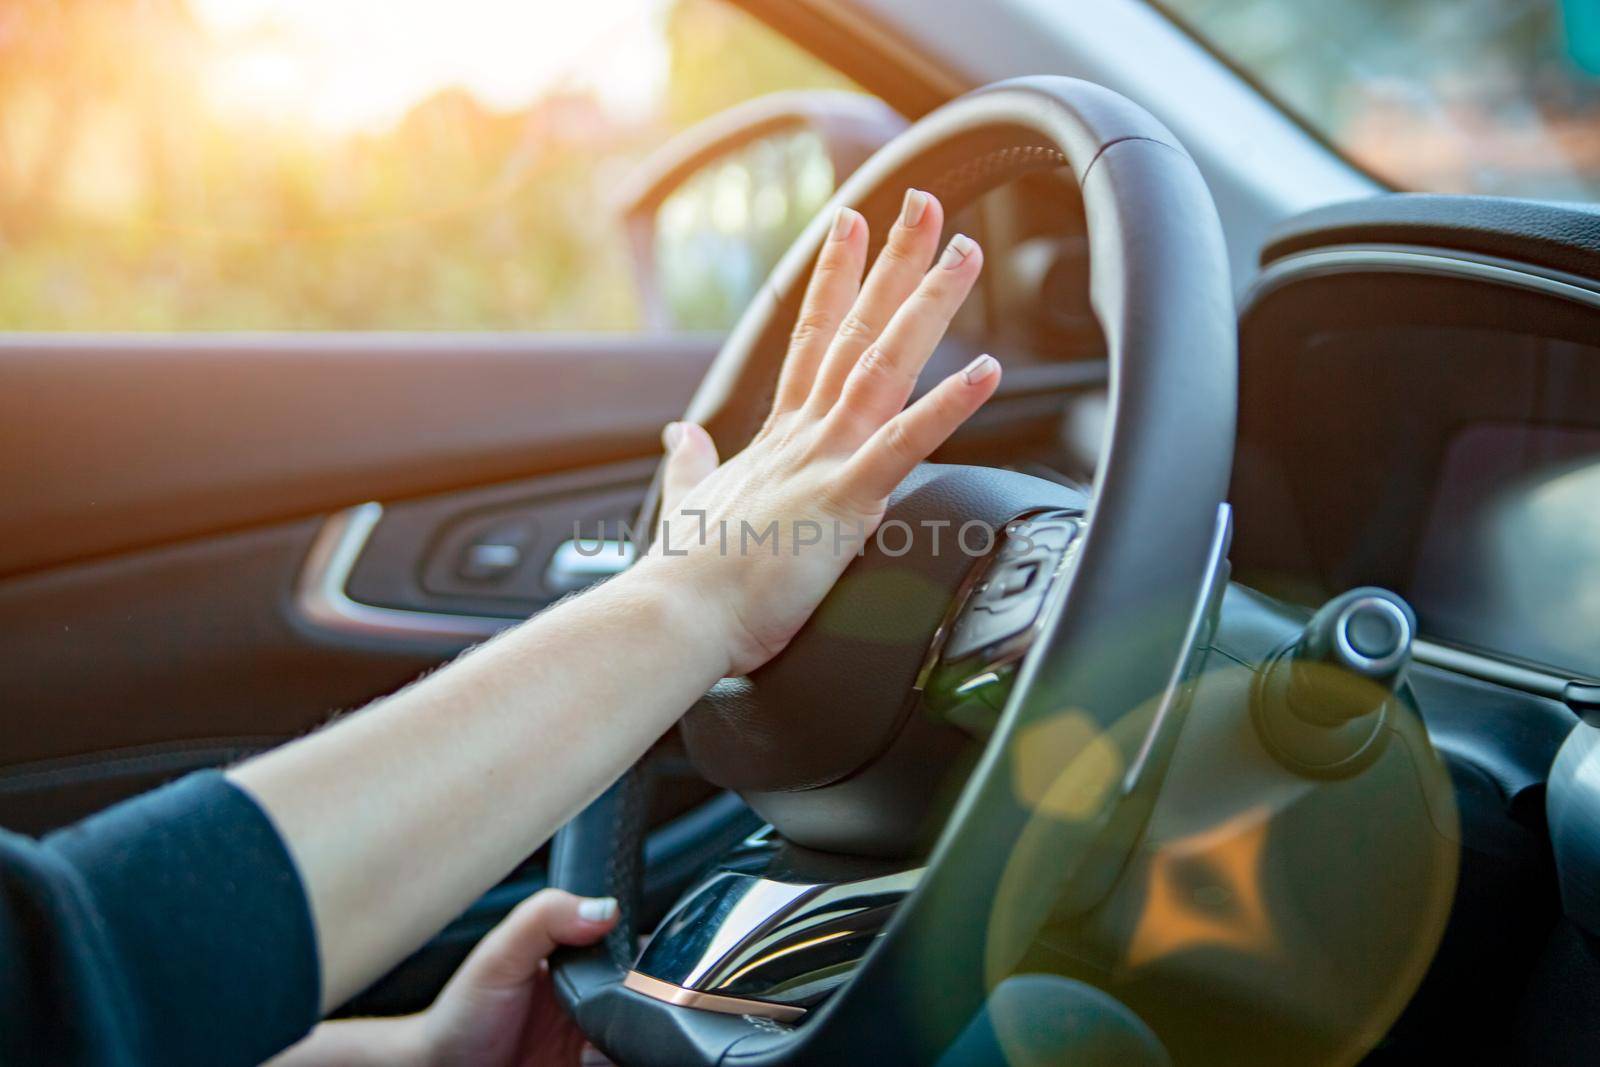 female hand presses the horn on the steering wheel of a modern car. no face